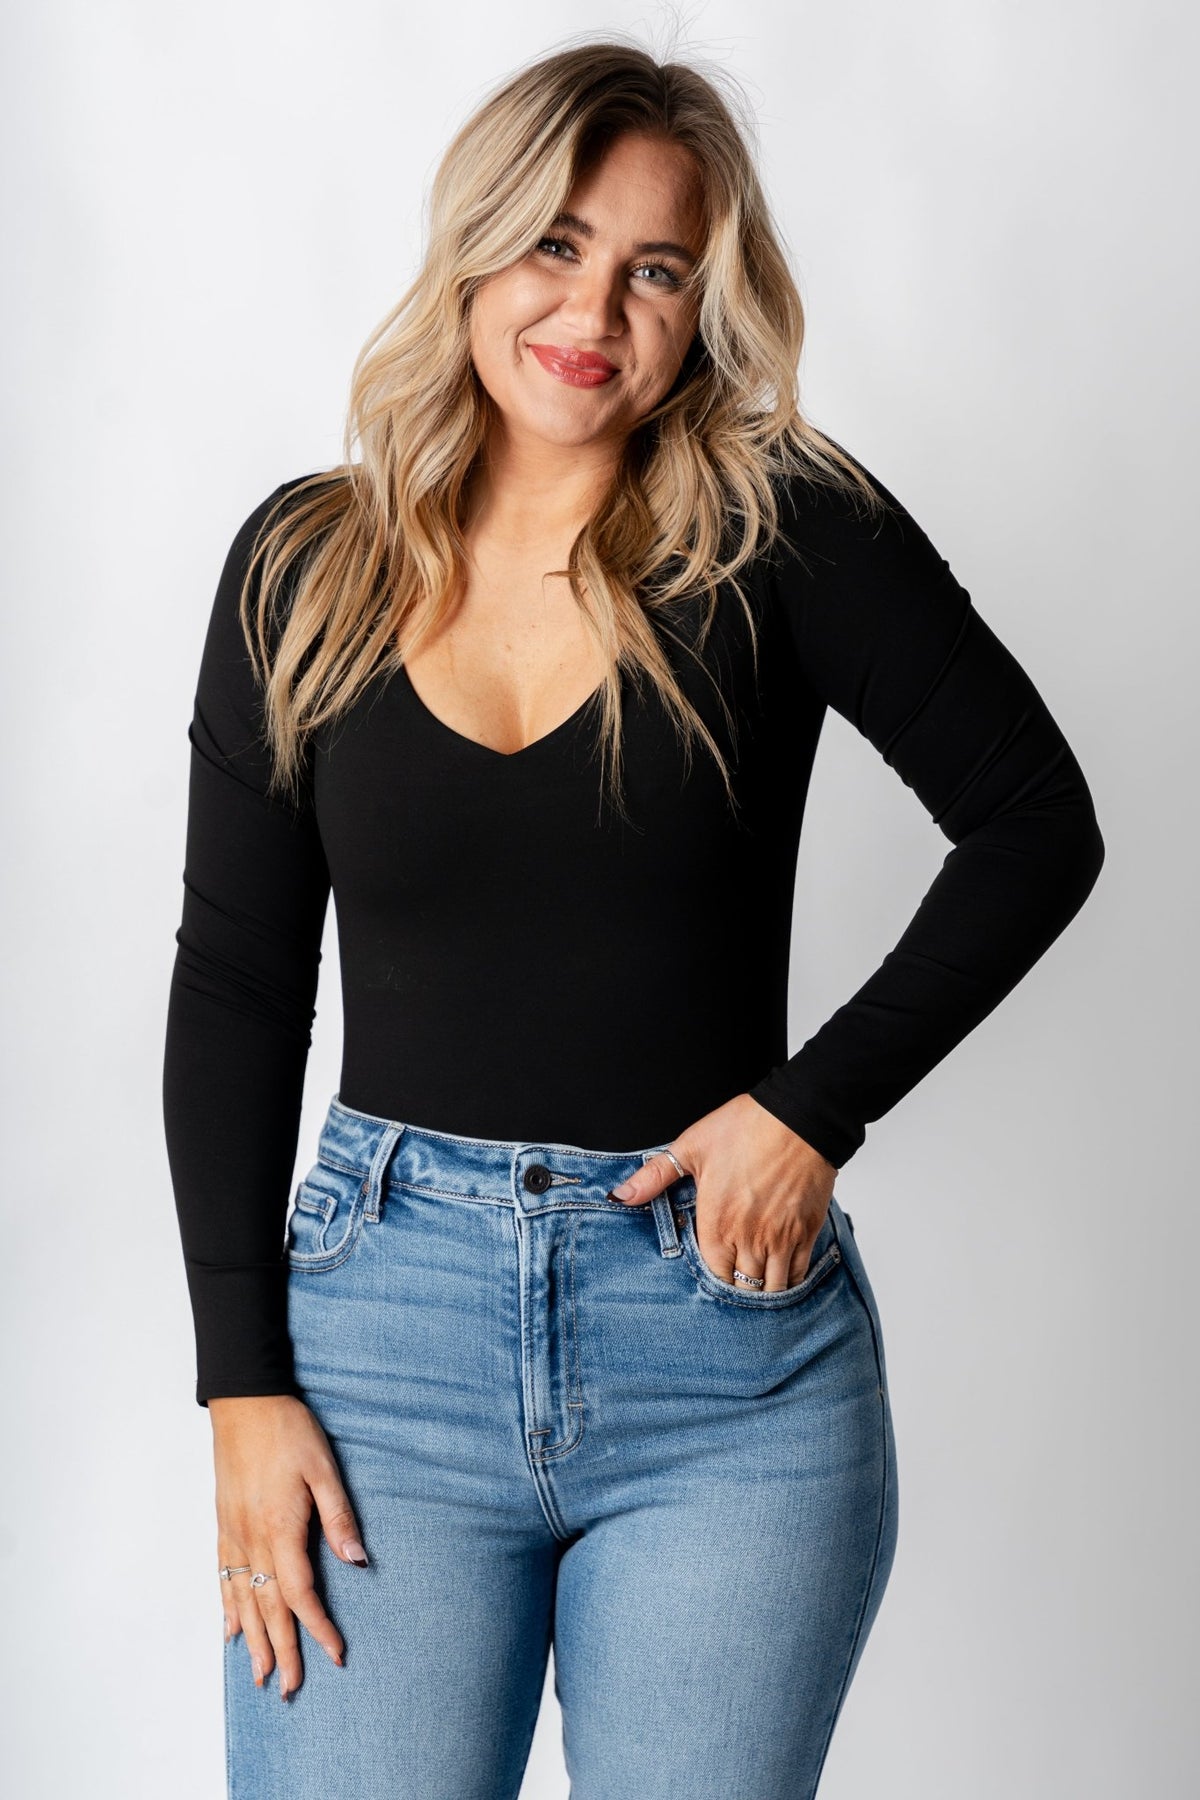 Z Supply So smooth bodysuit black - Z Supply bodysuit - Z Supply Tops, Dresses, Tanks, Tees, Cardigans, Joggers and Loungewear at Lush Fashion Lounge